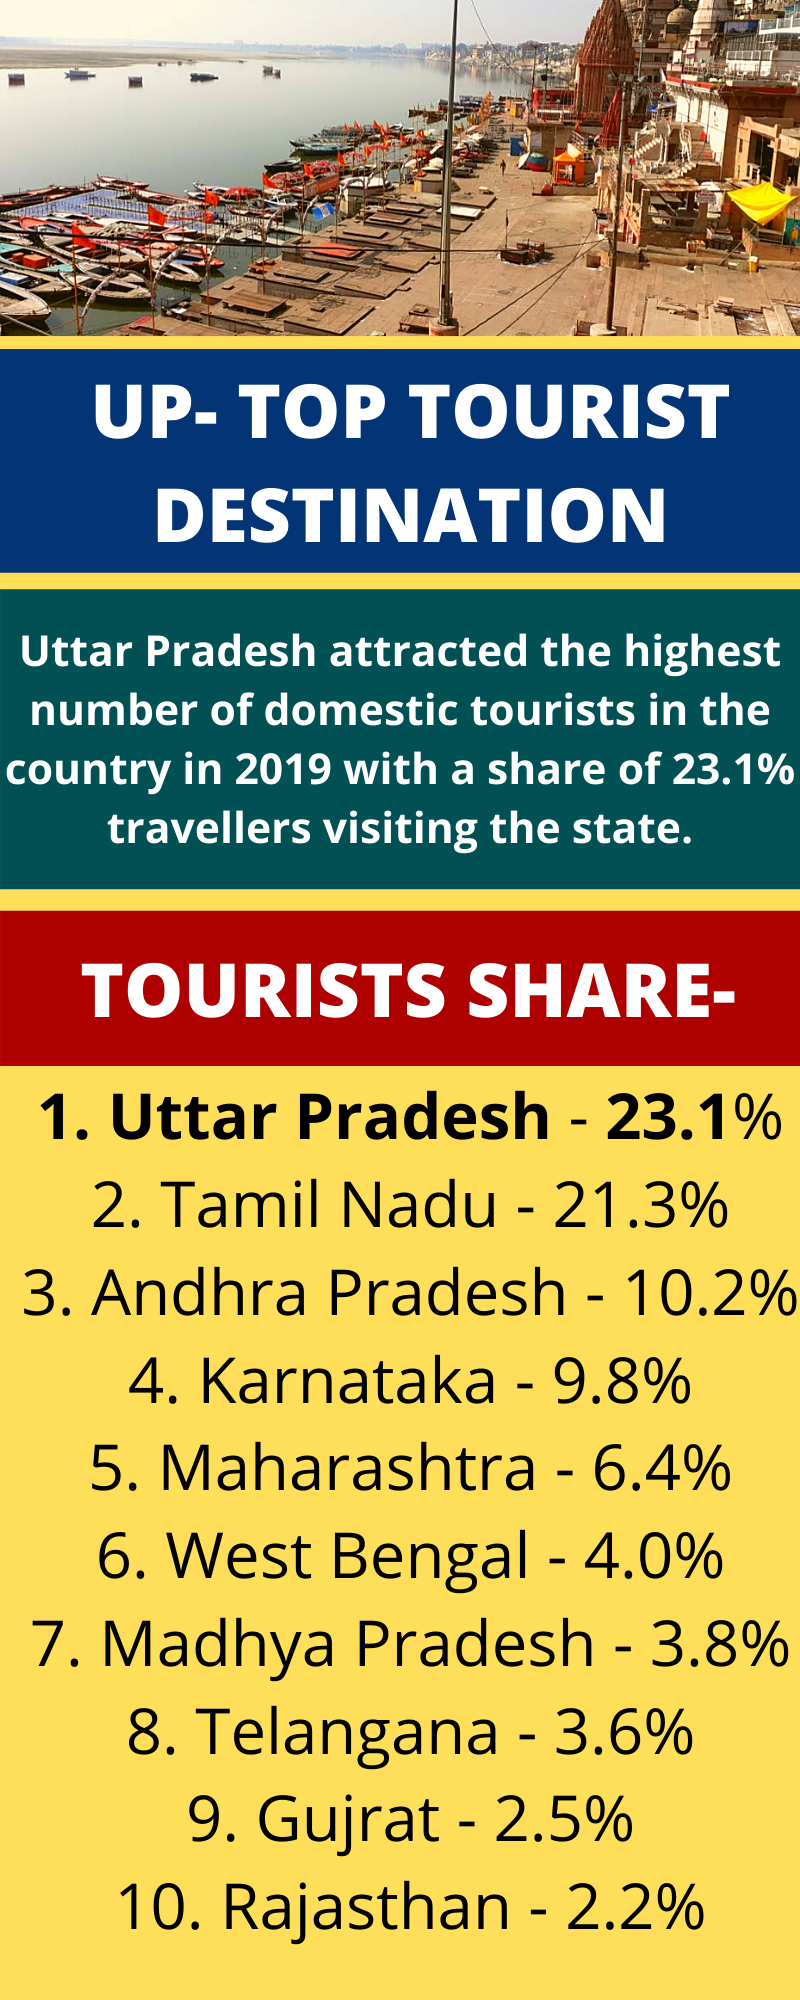 Uttar Pradesh attracted the highest number of domestic tourists